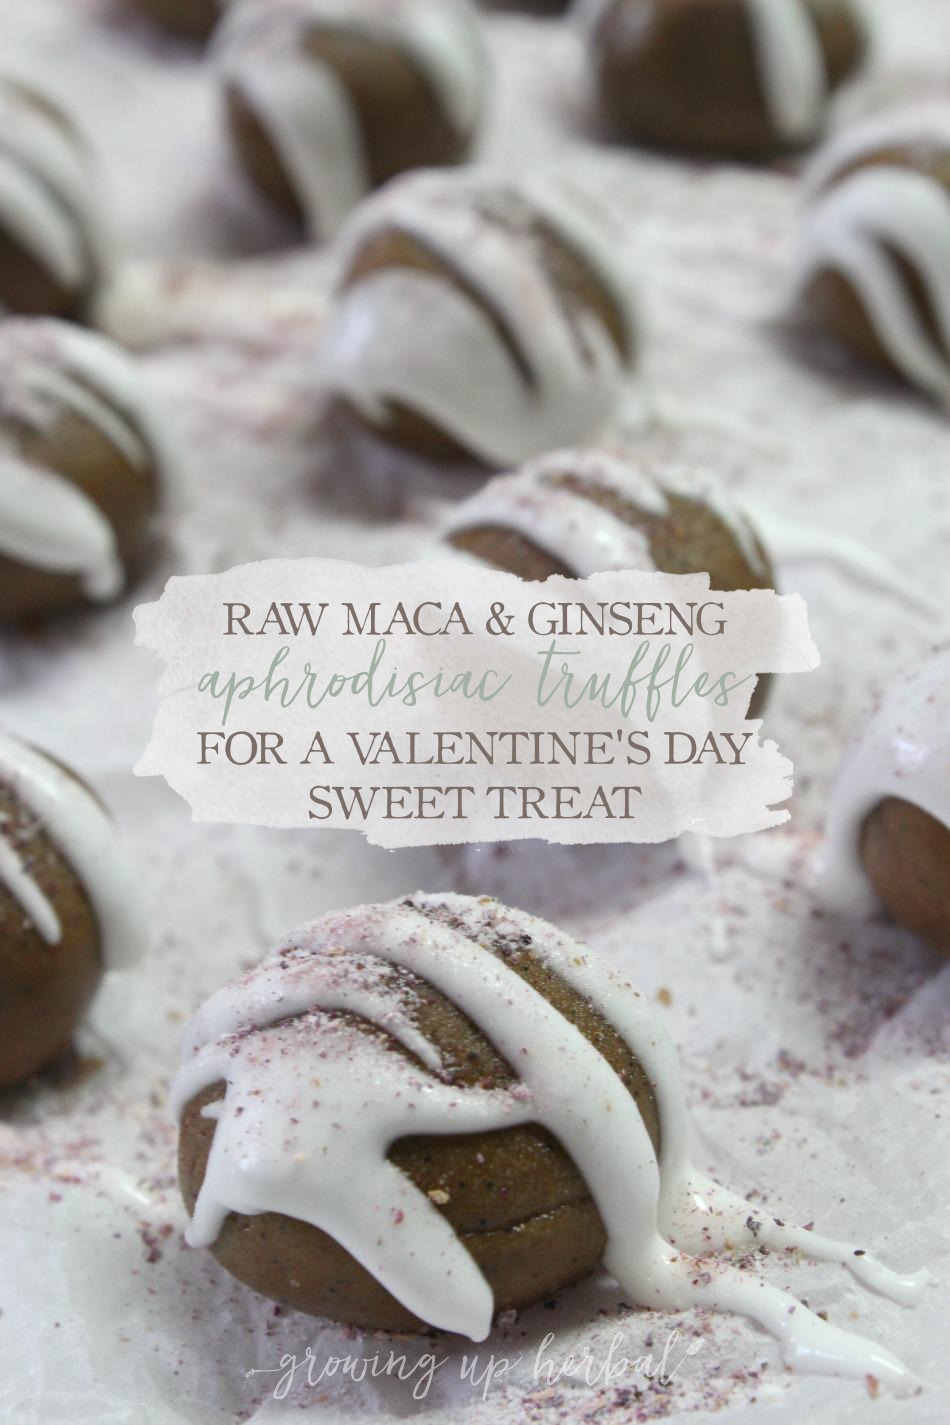 Raw Maca & Ginseng Aphrodisiac Truffles For A Valentine's Day Treat | Growing Up Herbal | Try these delicious, sweet, and healthy herbal aphrodisiac truffles this Valentine's Day. Perfect for dessert or to accompany a thoughtful gift!